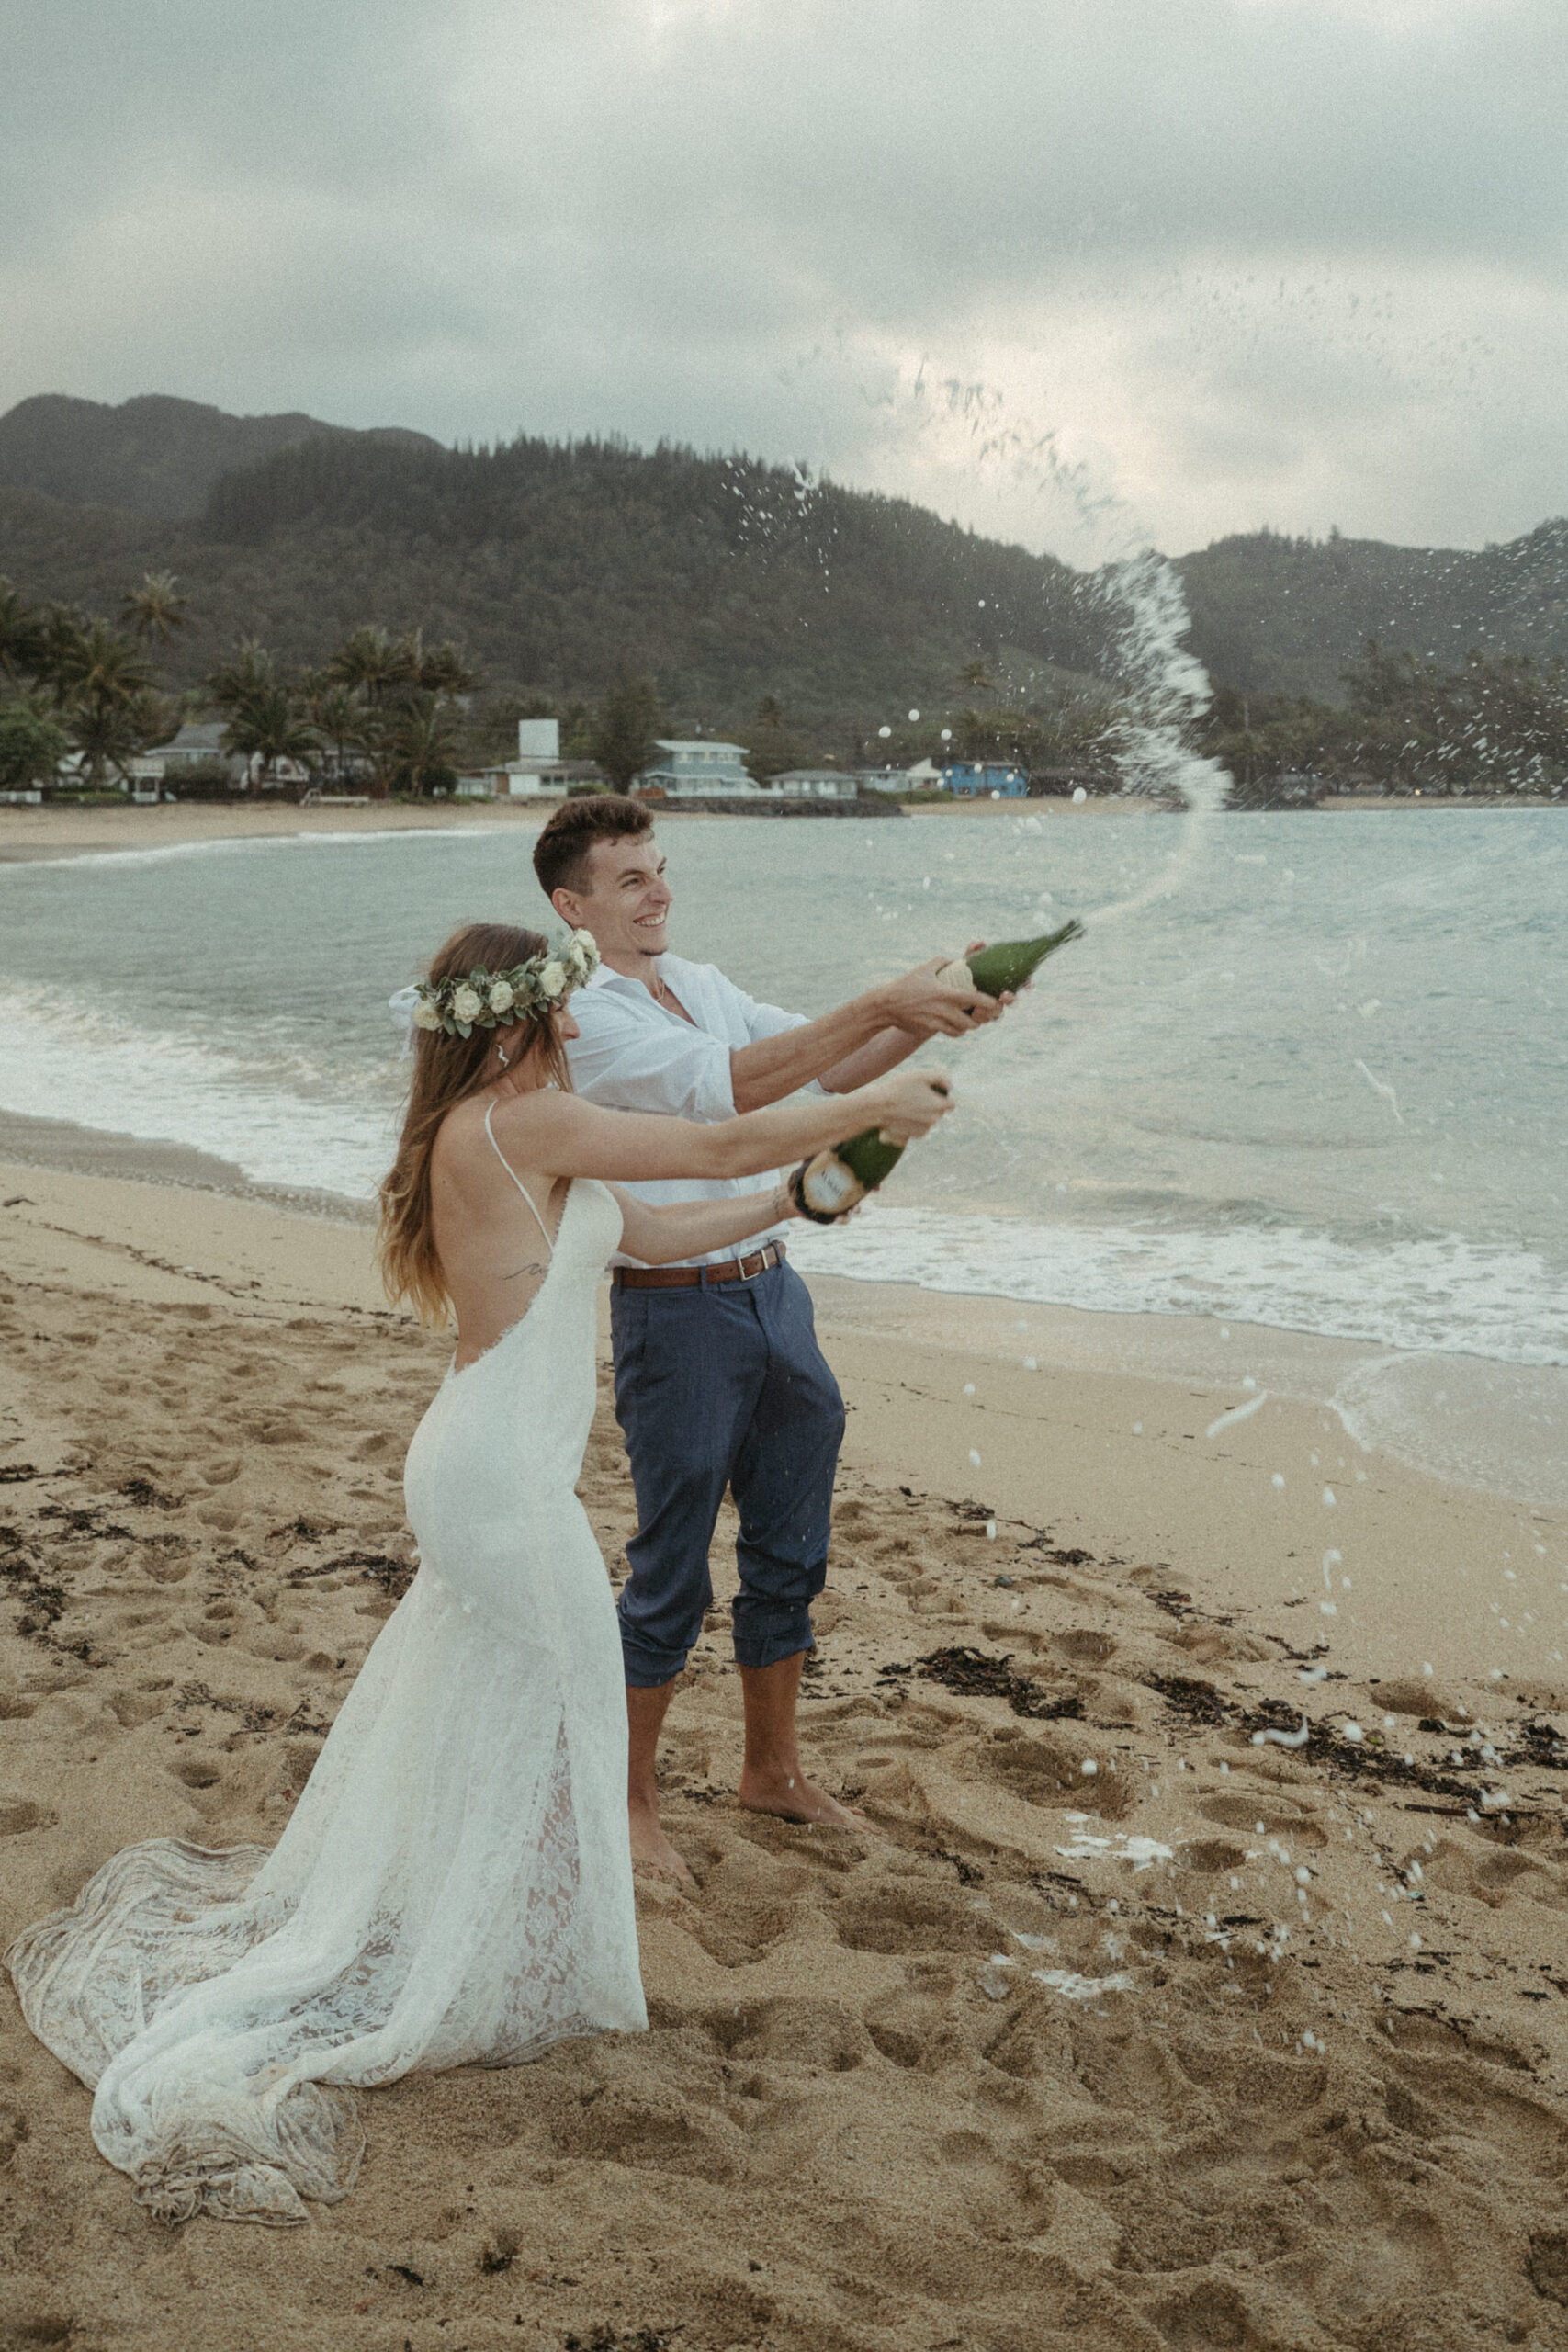 Bride and groom spray champagne on beach.